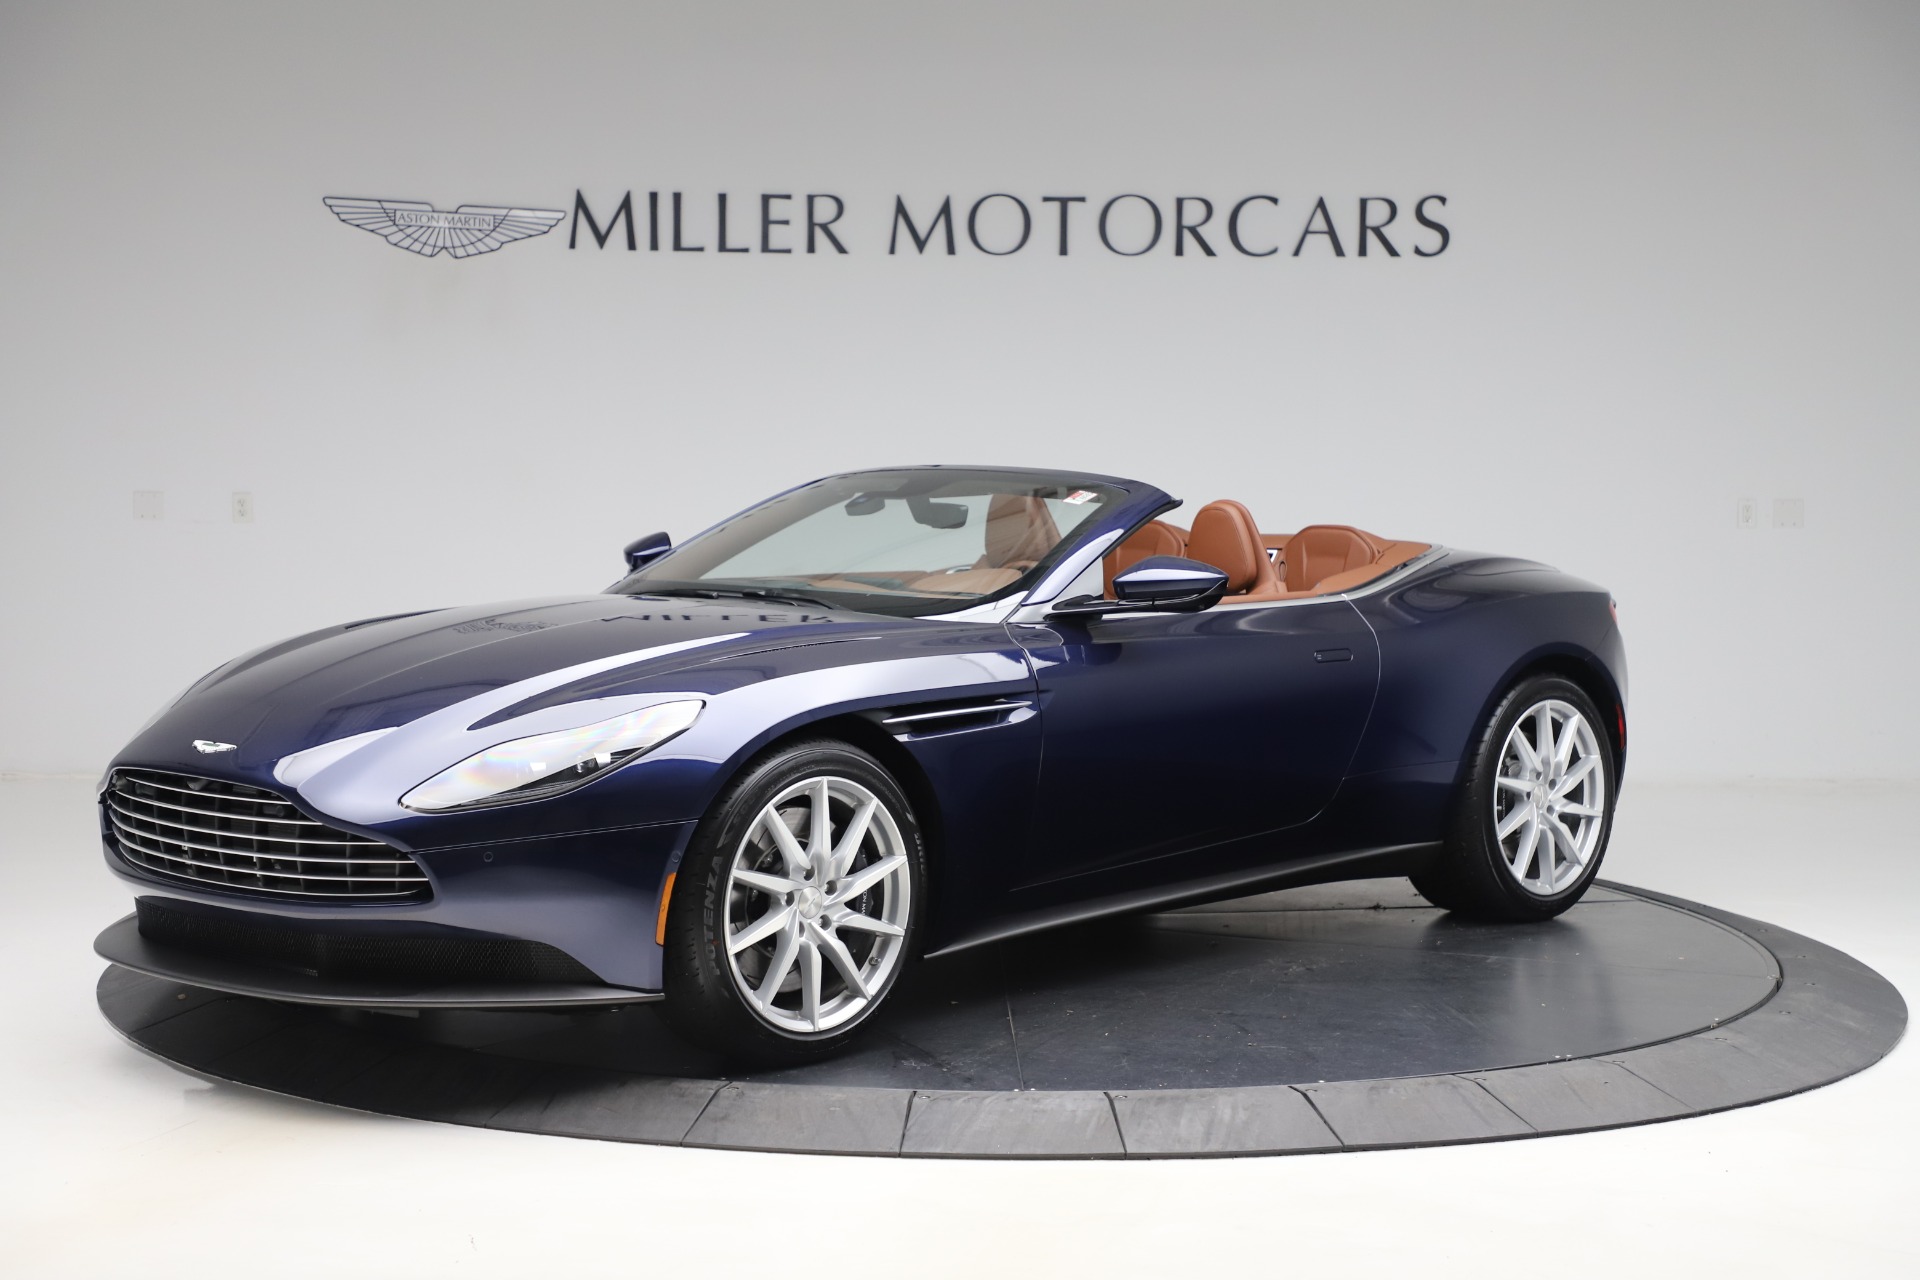 New 2020 Aston Martin DB11 Volante Convertible for sale Sold at Maserati of Westport in Westport CT 06880 1